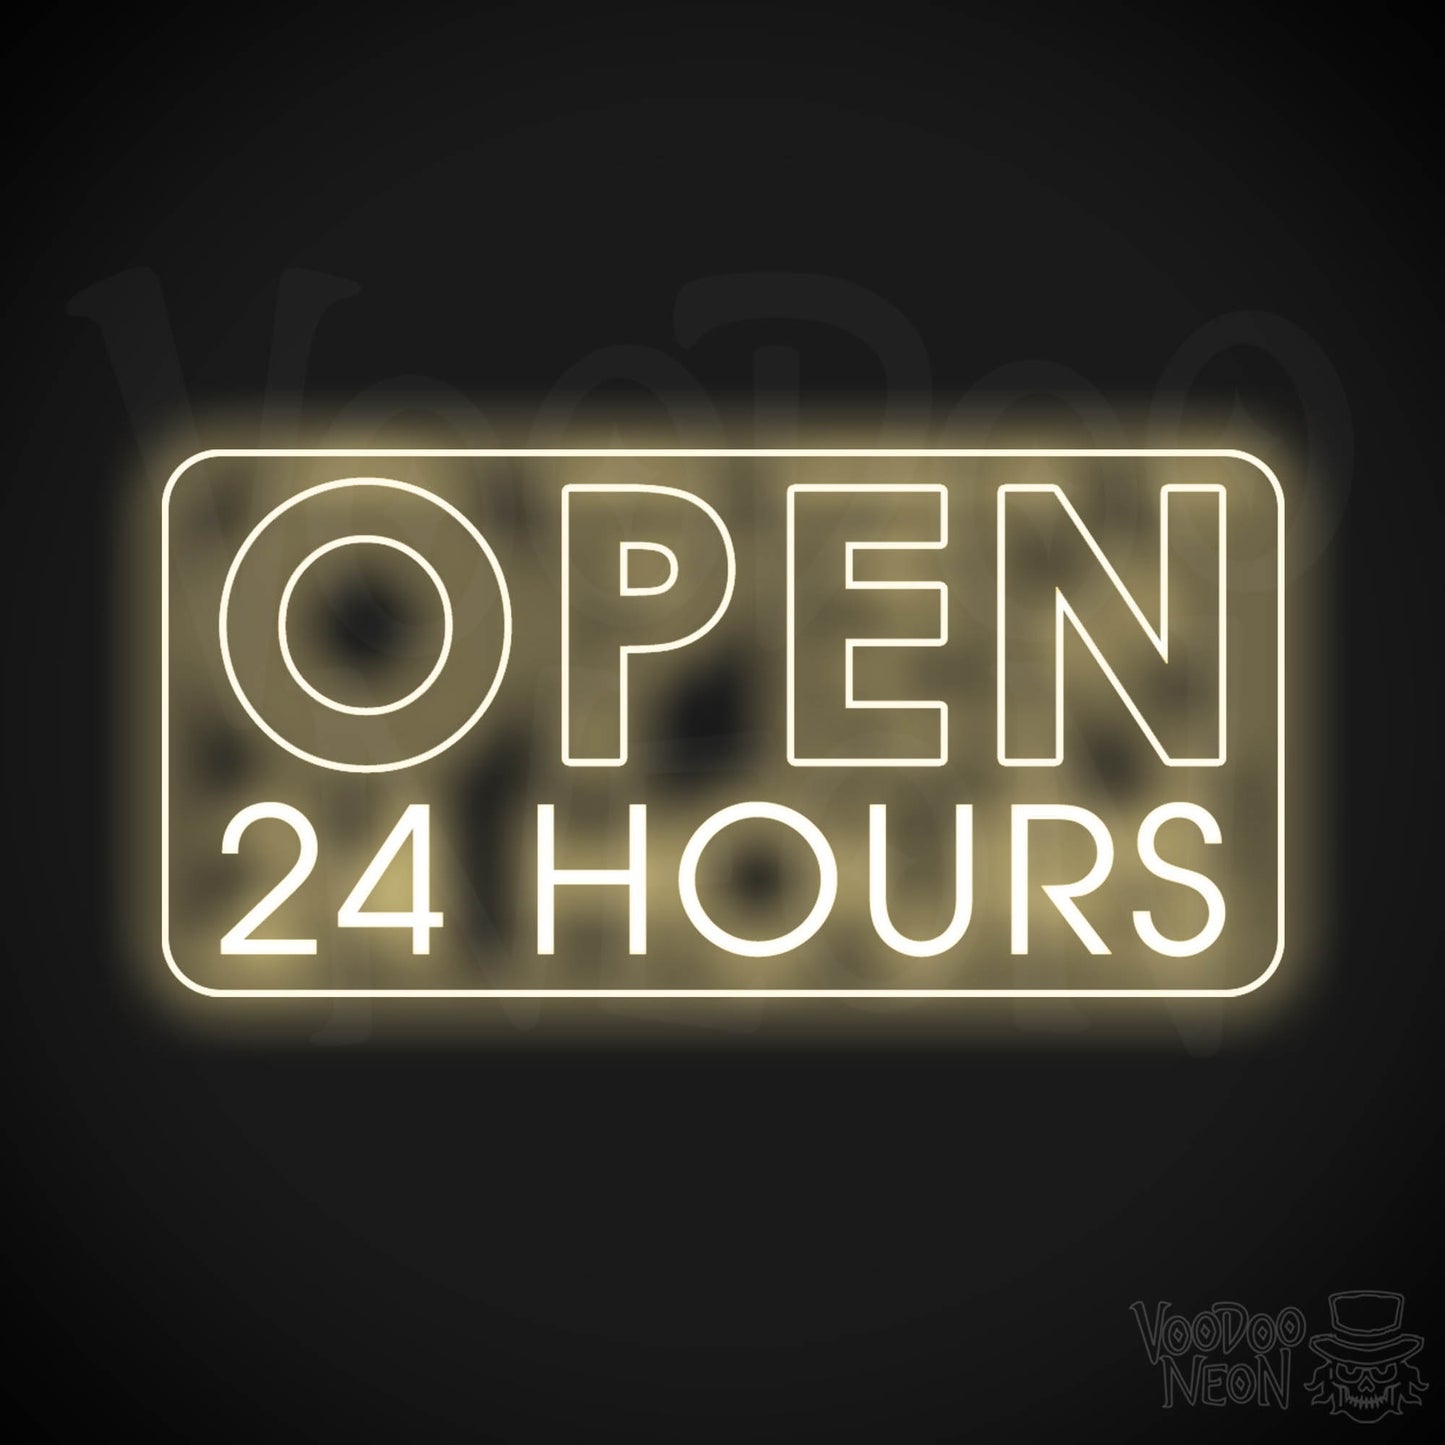 Open 24 Hours Neon Sign - Neon Open 24 Hours Sign - Shop Signs - Color Warm White